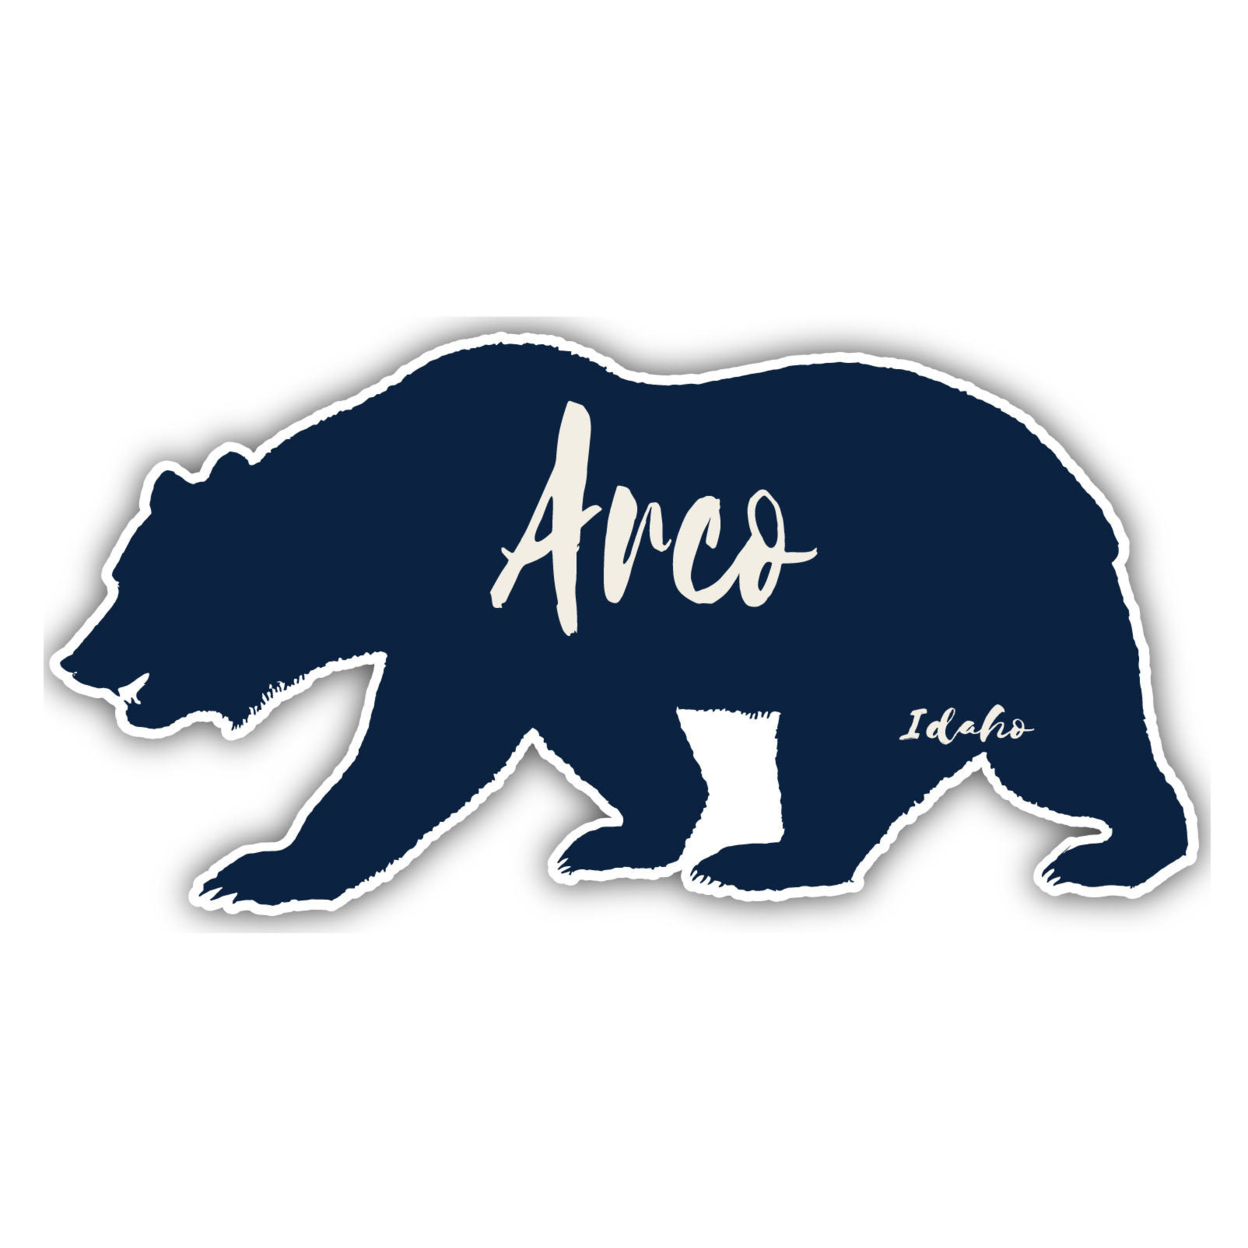 Arco Idaho Souvenir Decorative Stickers (Choose Theme And Size) - 4-Pack, 4-Inch, Bear